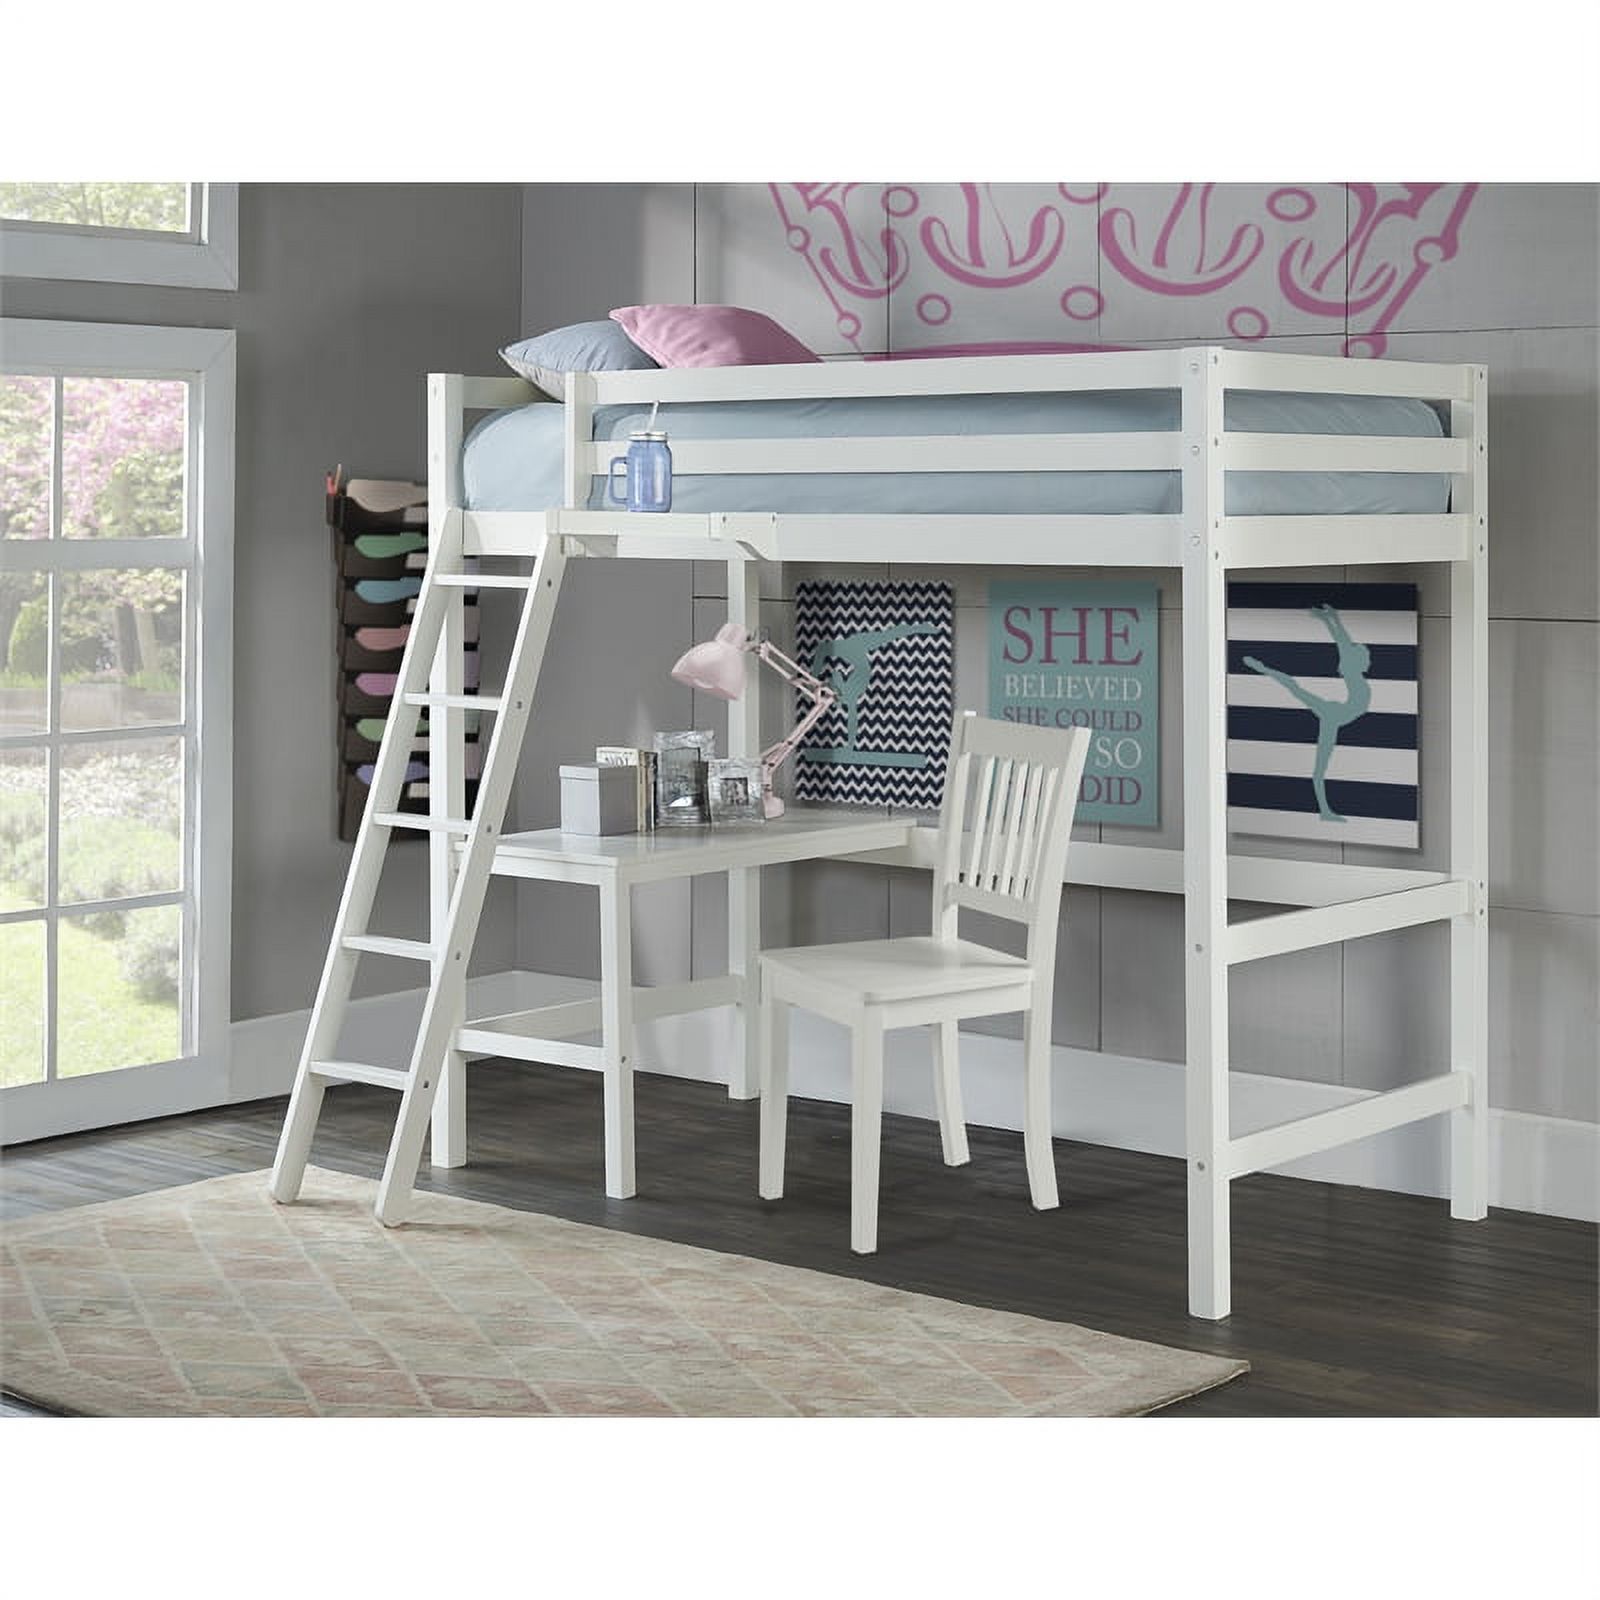 Hillsdale Furniture Kids and Teen Caspian Twin Loft Bed with Desk, Chair and Hanging Tray Nightstand, White - image 2 of 3